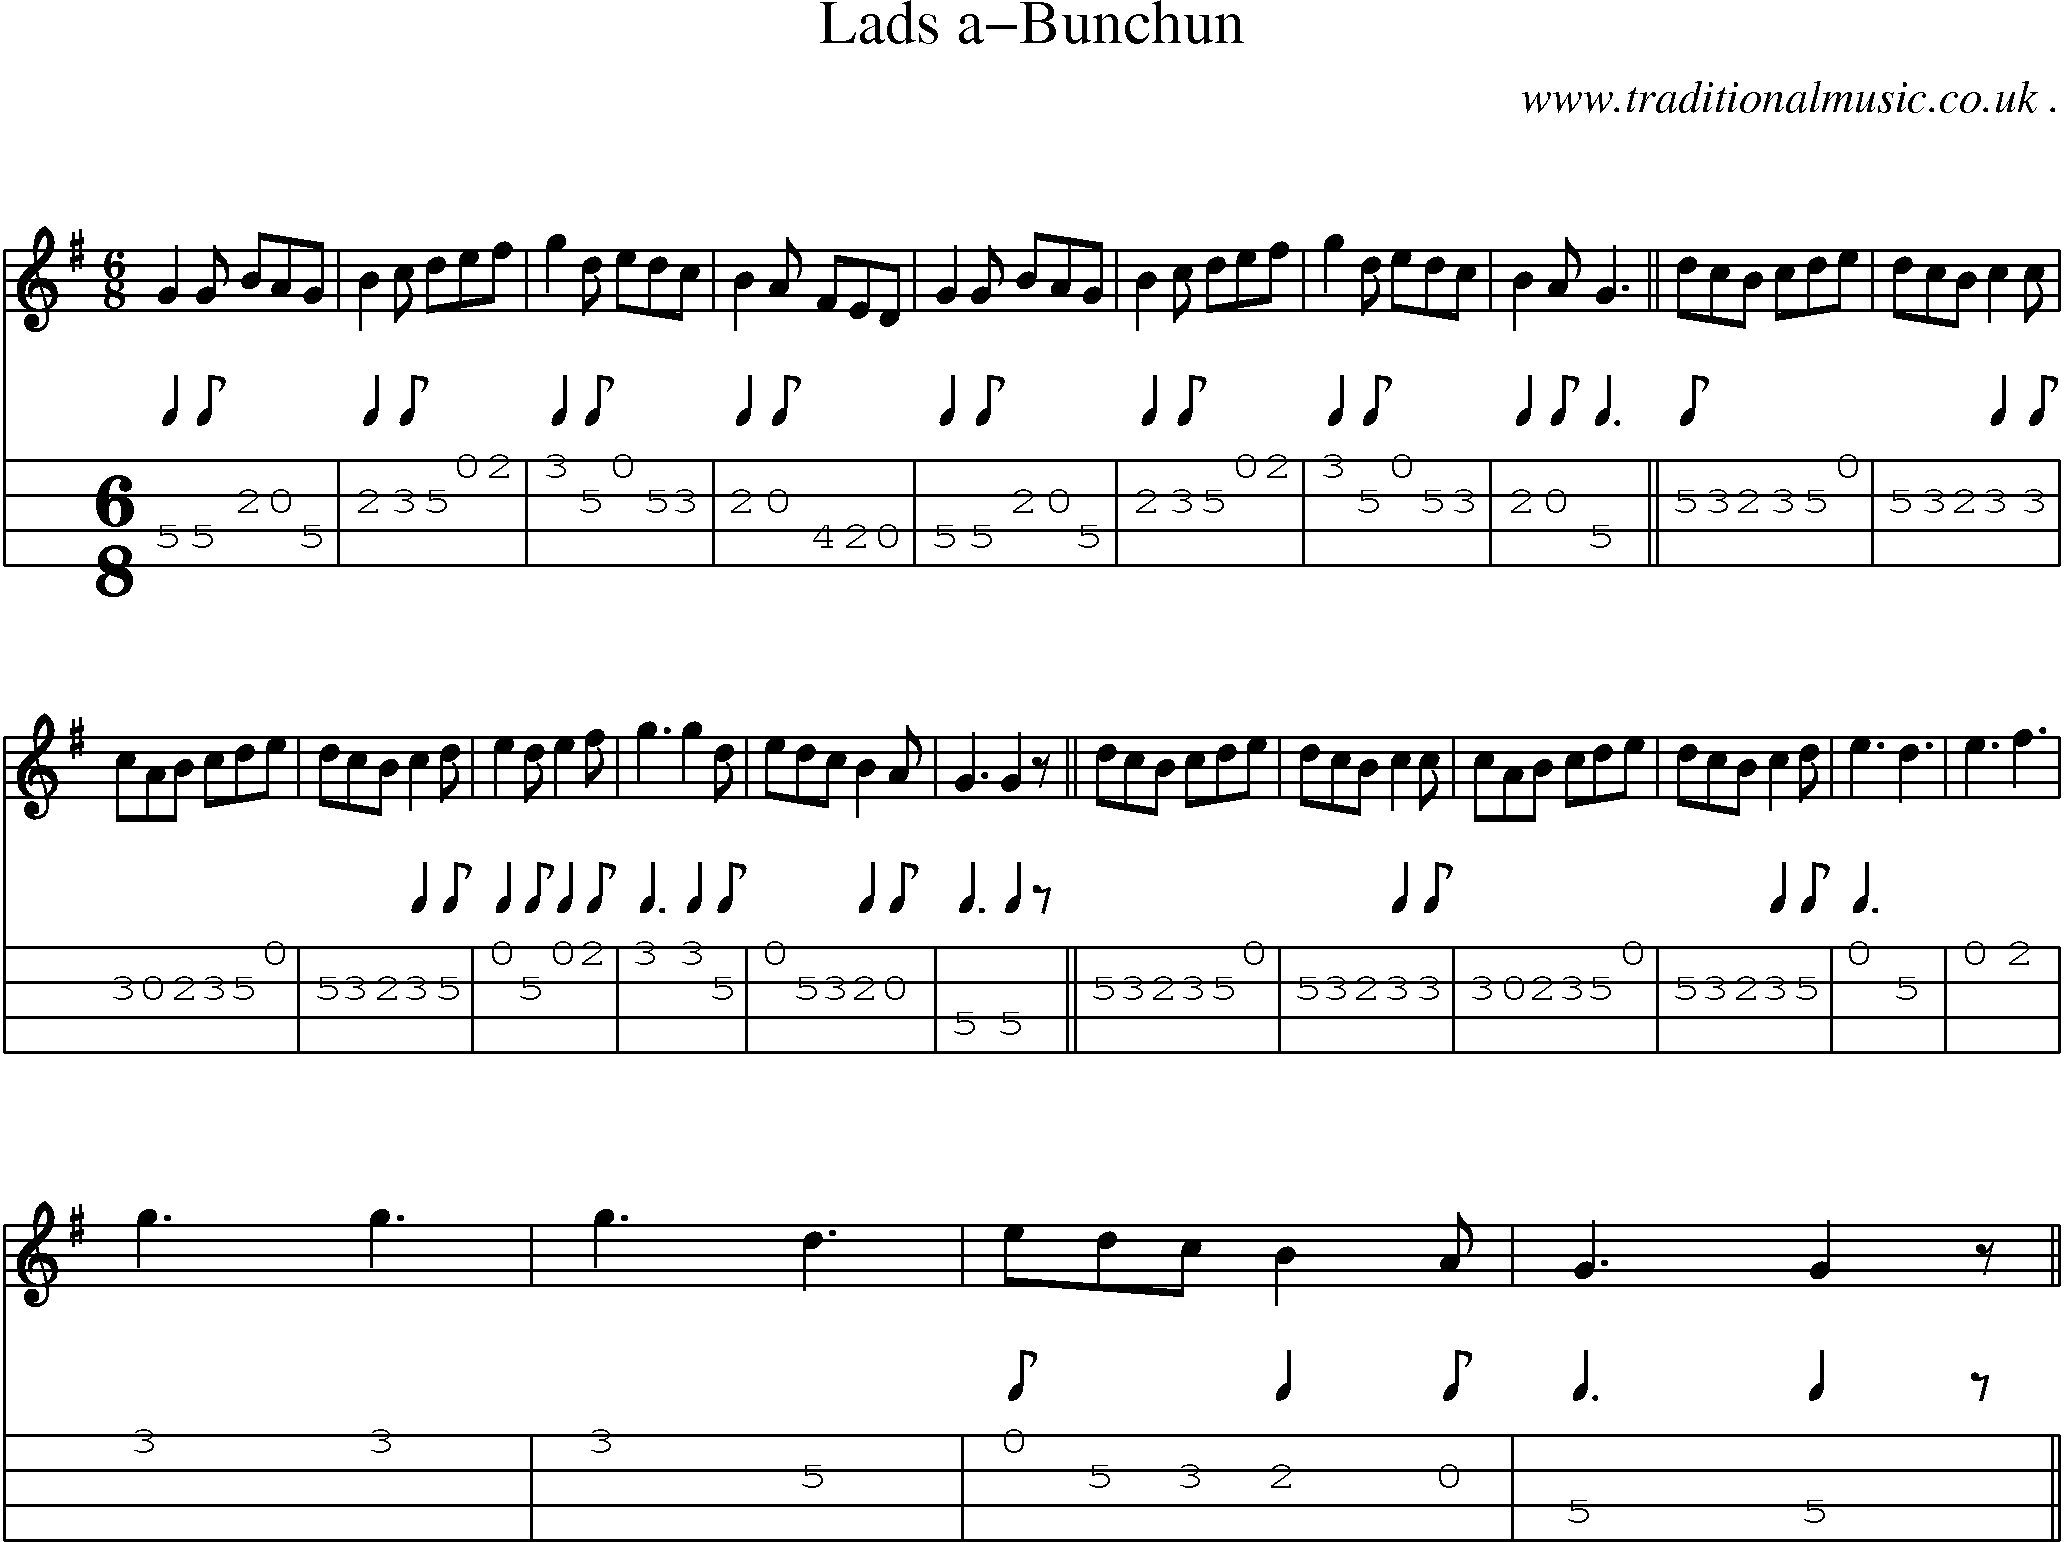 Sheet-Music and Mandolin Tabs for Lads A-bunchun